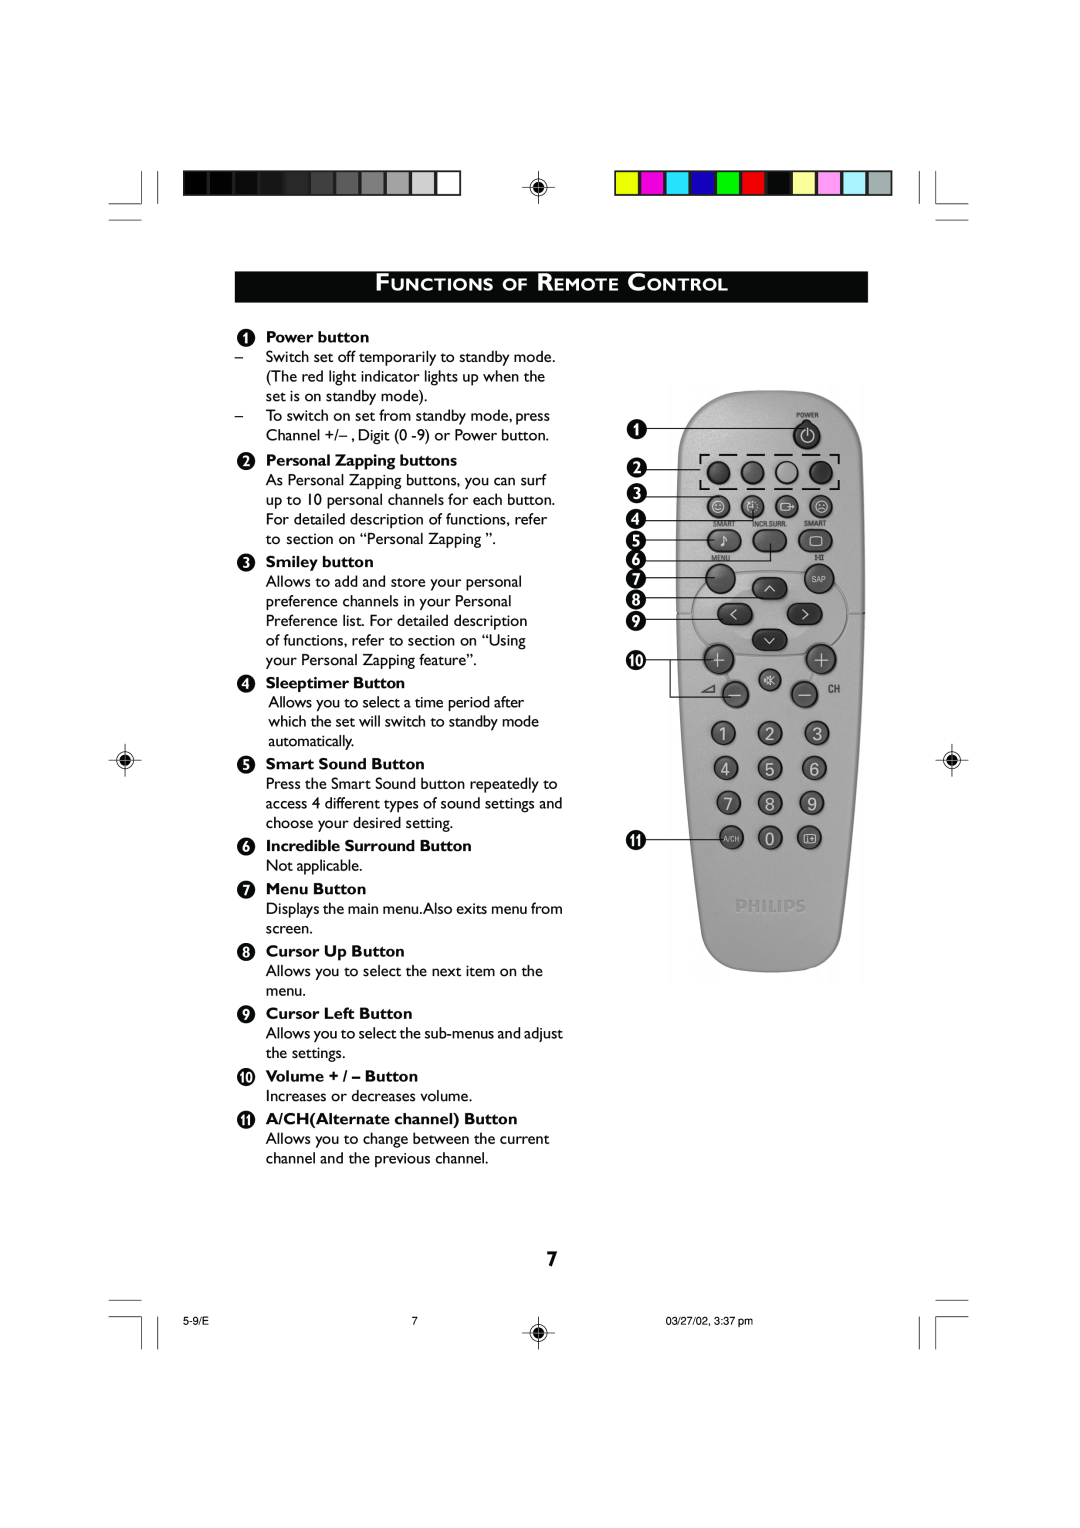 Philips 14PT2001 Functions Of Remote Control, Power button, é Personal Zapping buttons, “ Smiley button, Cursor Up Button 